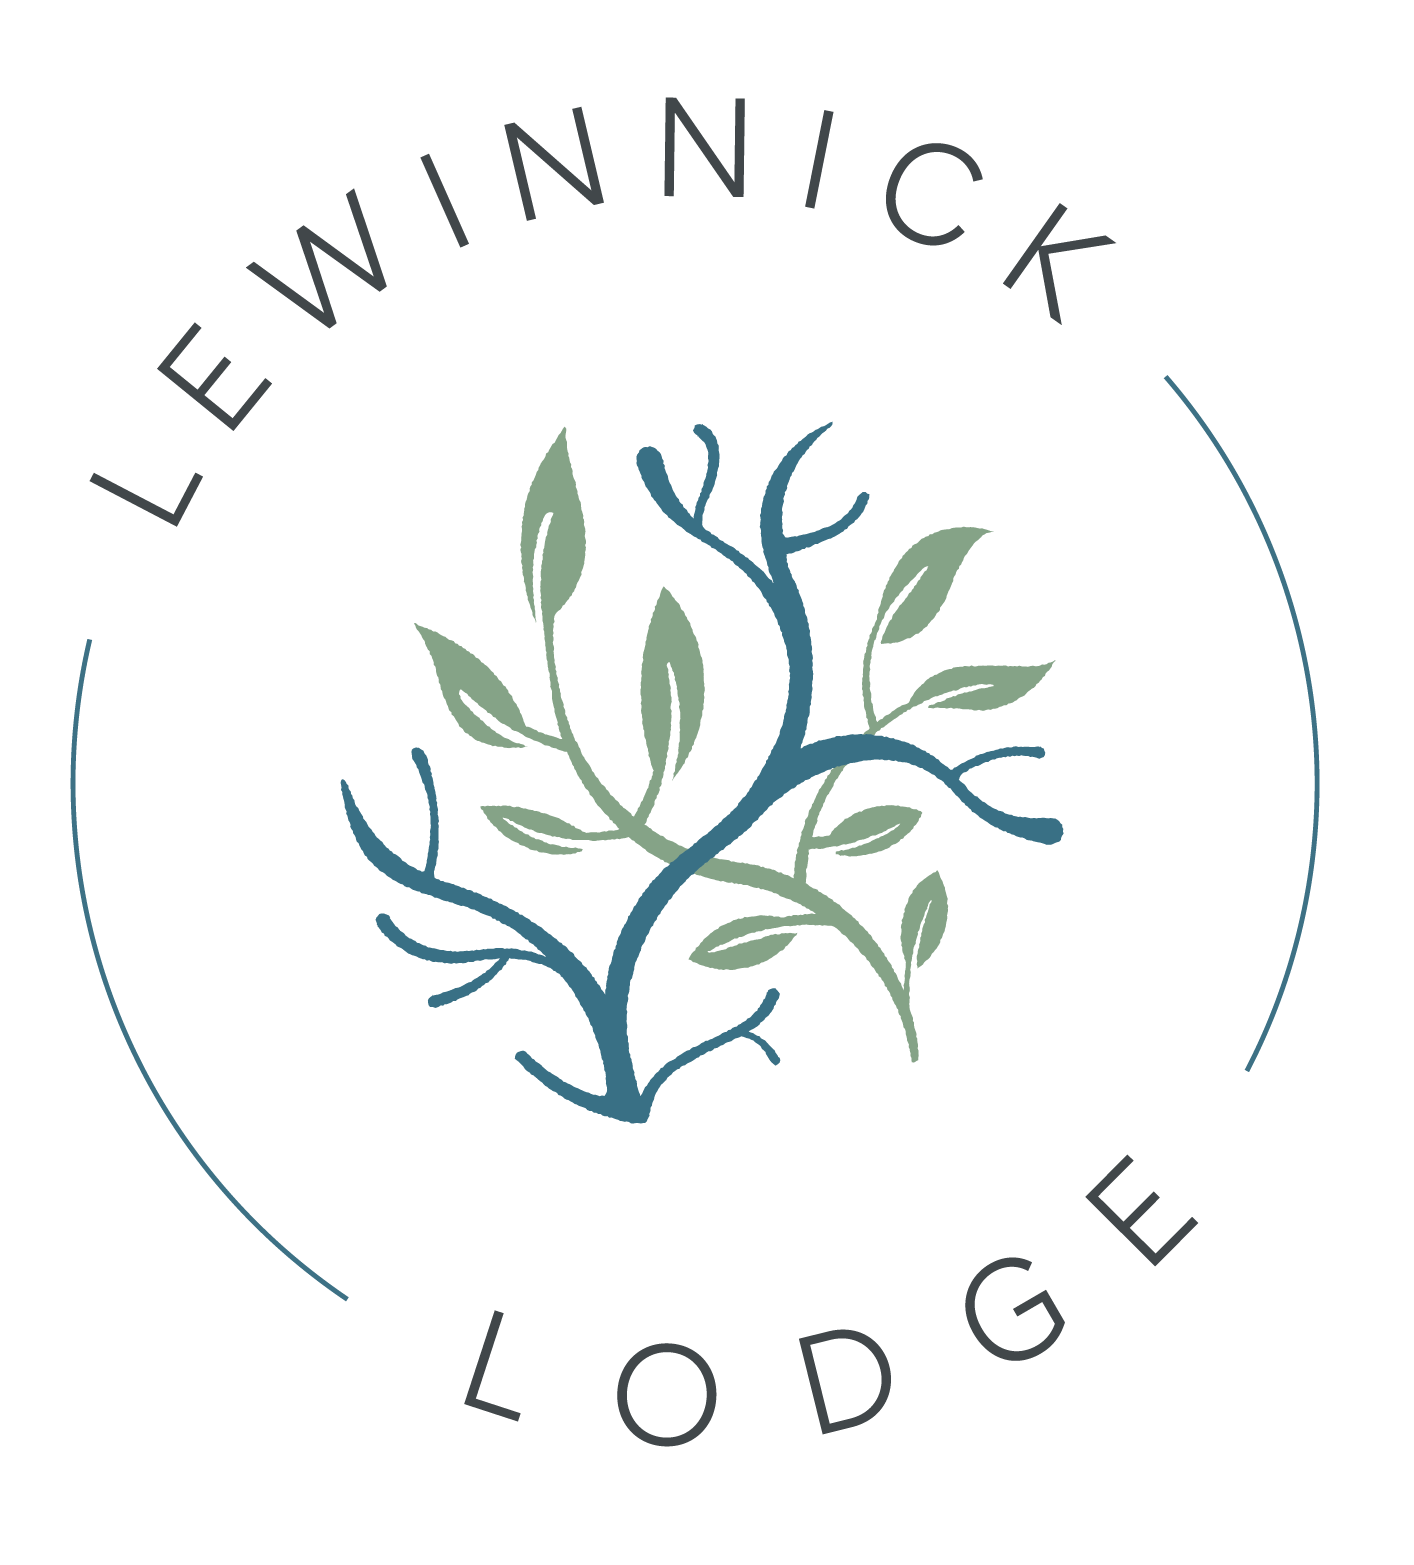 The logo for Lewinnick Lodge